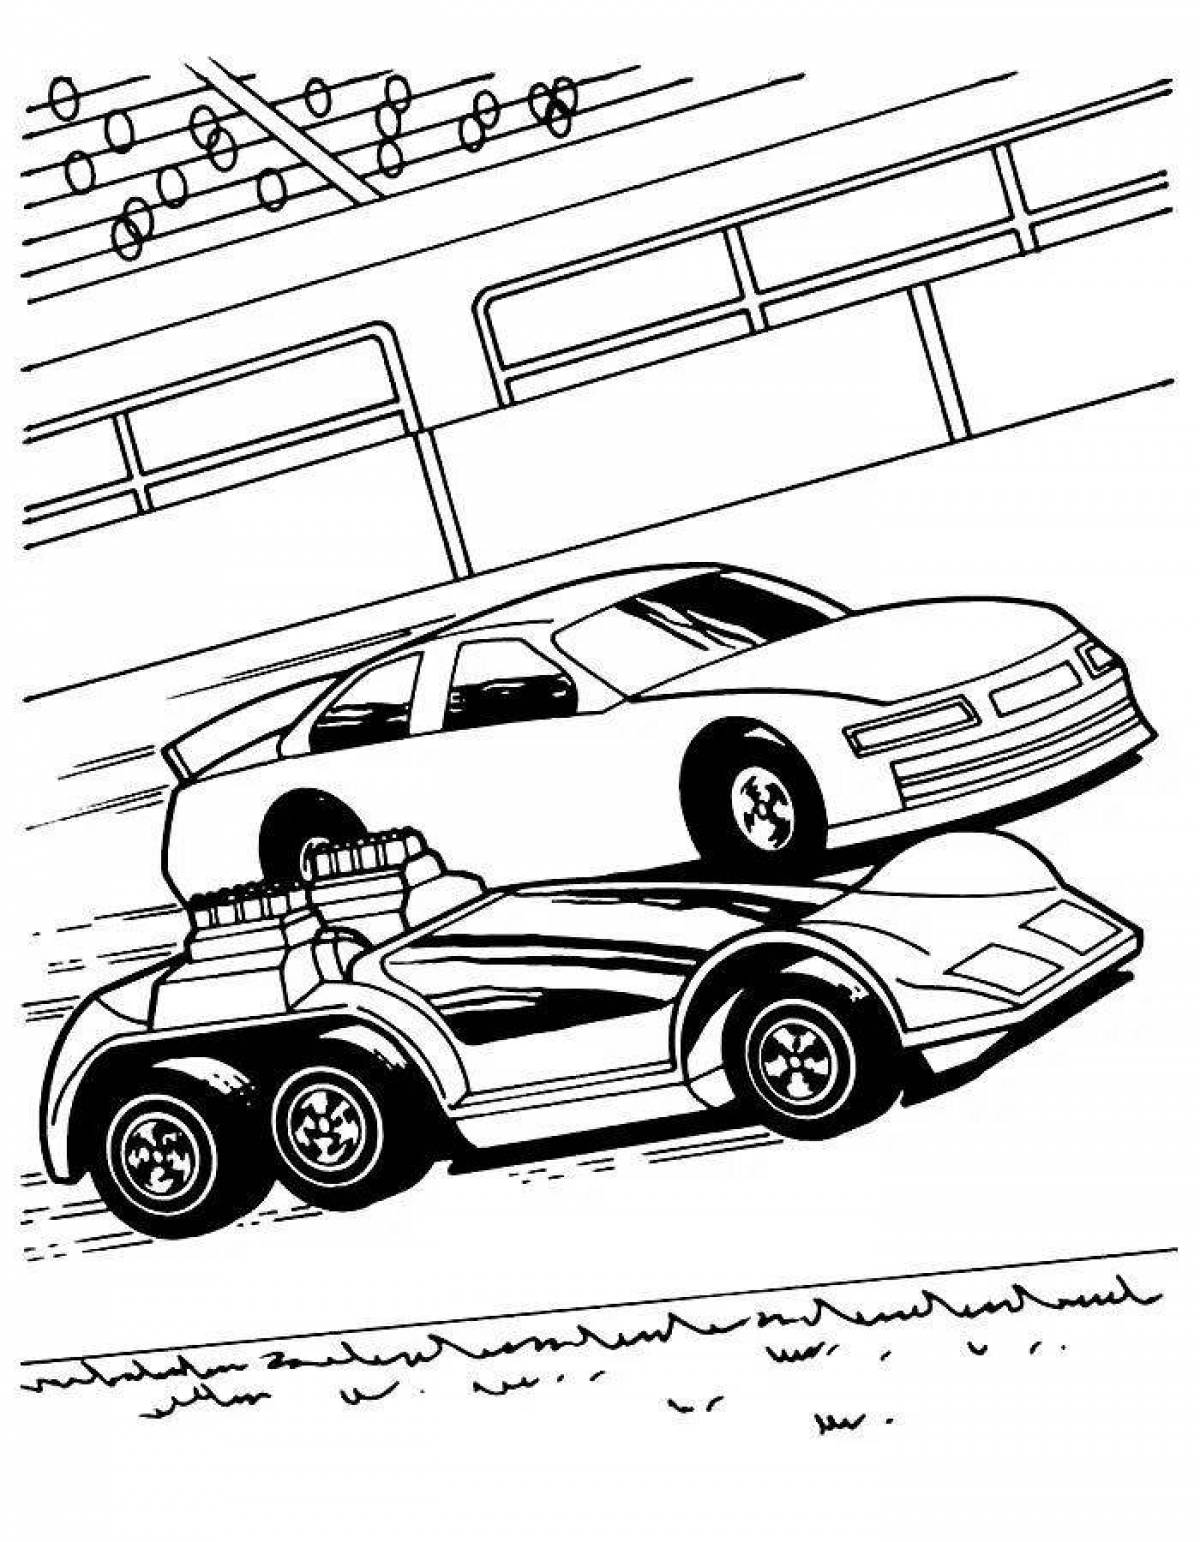 Attractive coloring pages of hot wheels cars